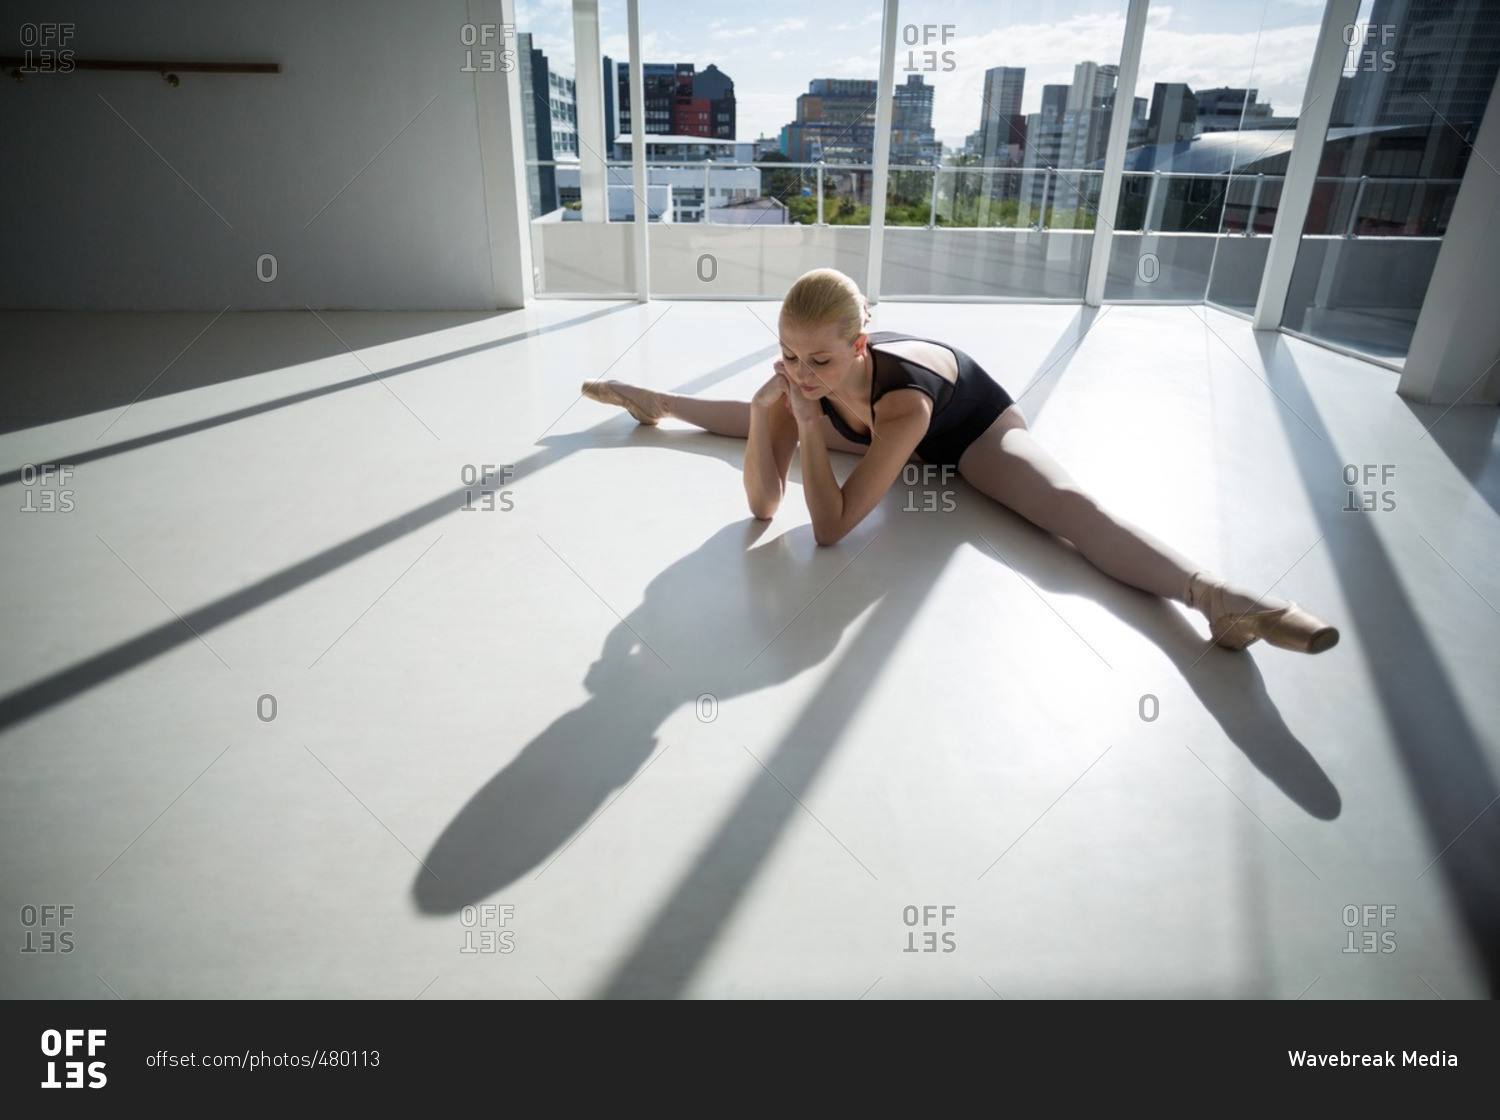 Top view of ballerina stretching on the floor